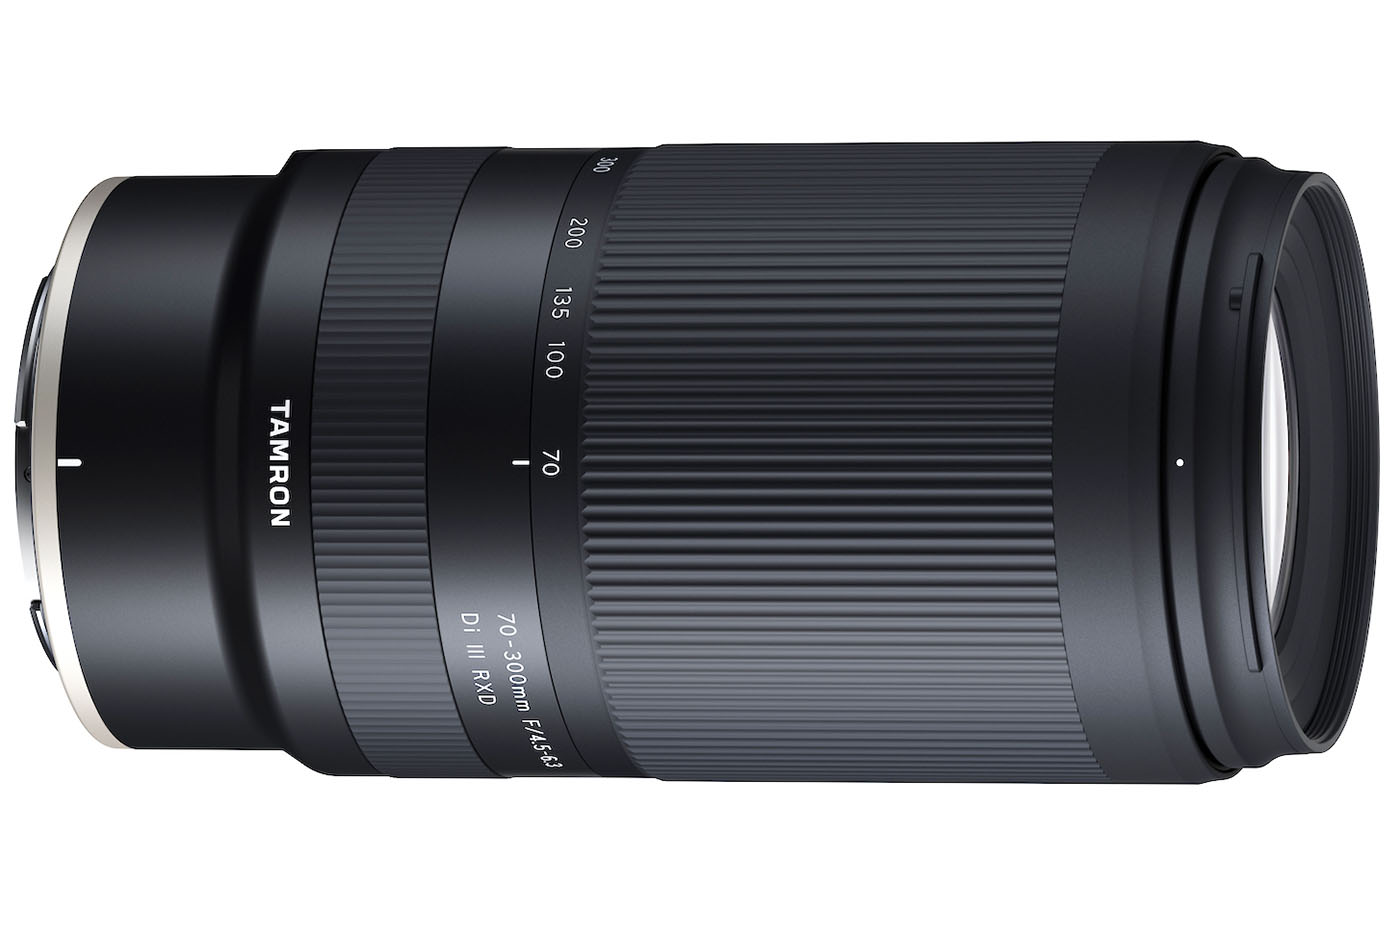 Nikon Z Is Getting a 70-300mm Lens! (From Tamron)